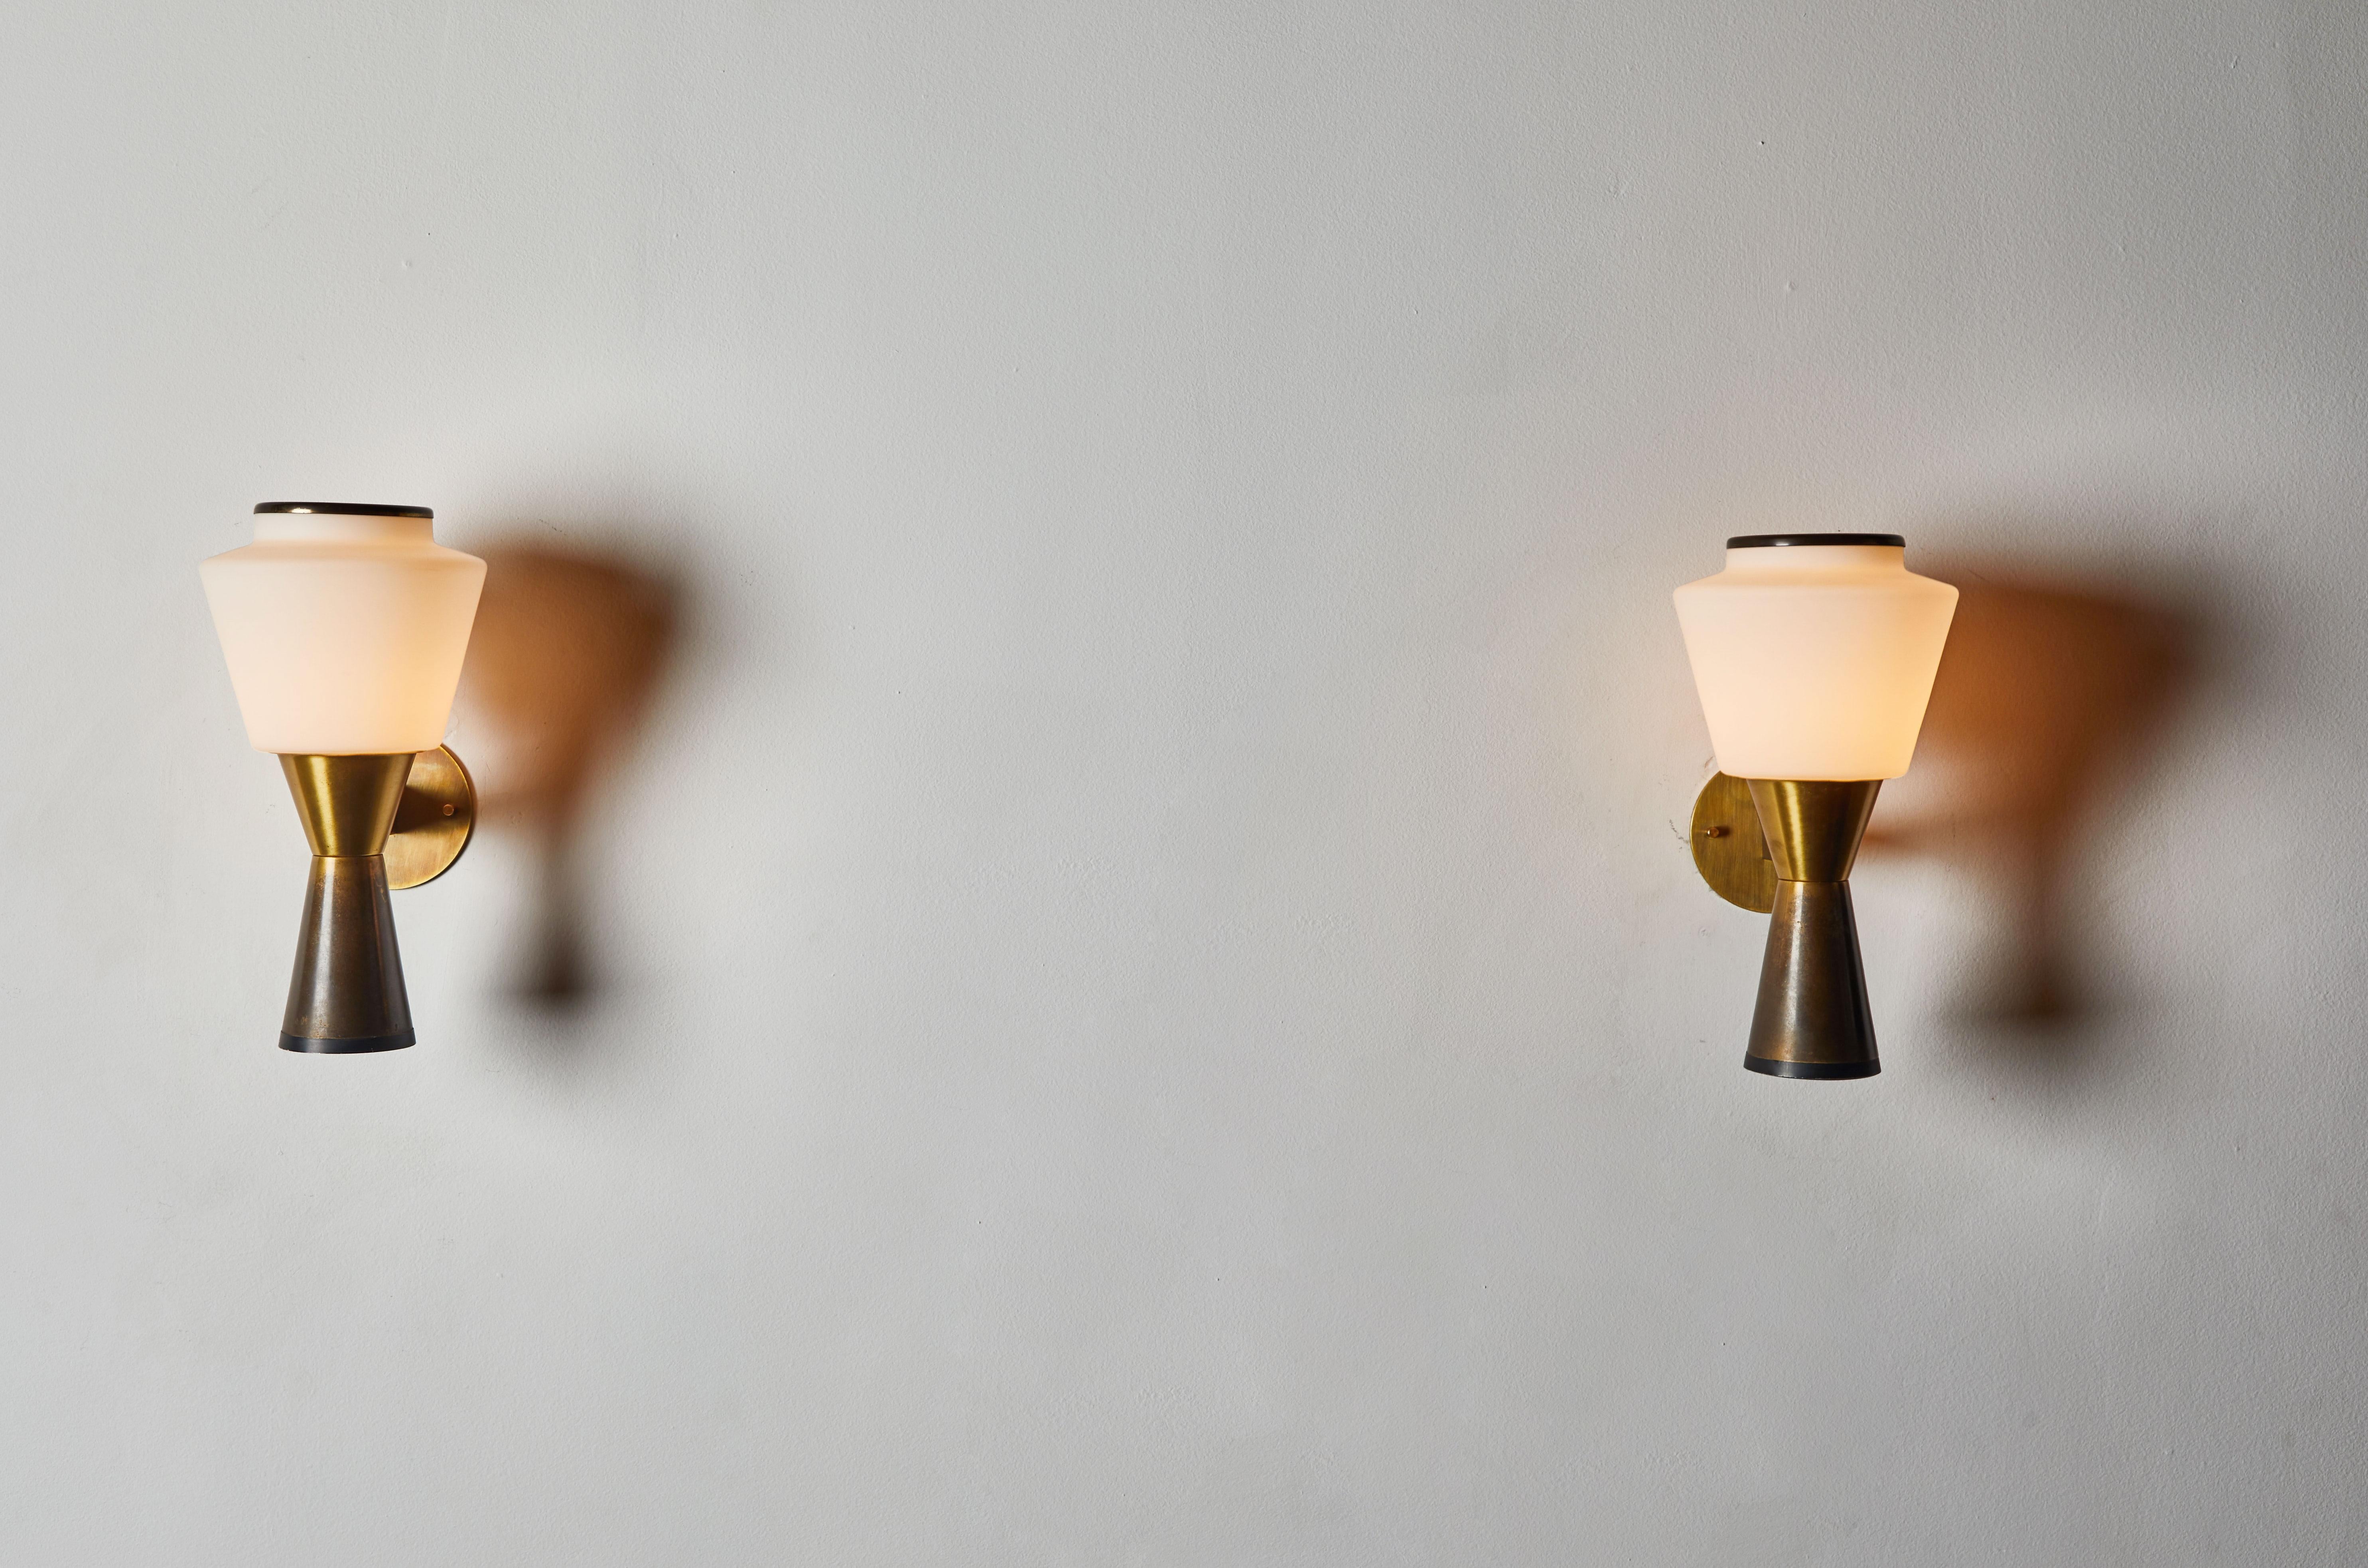 Pair of sconces by Stilnovo. Manufactured in Italy, circa 1960s. Patinated brass with brushed satin glass diffusers. Custom brass backplate. Rewired for US junction boxes. Each light takes one E27 60w maximum bulb.